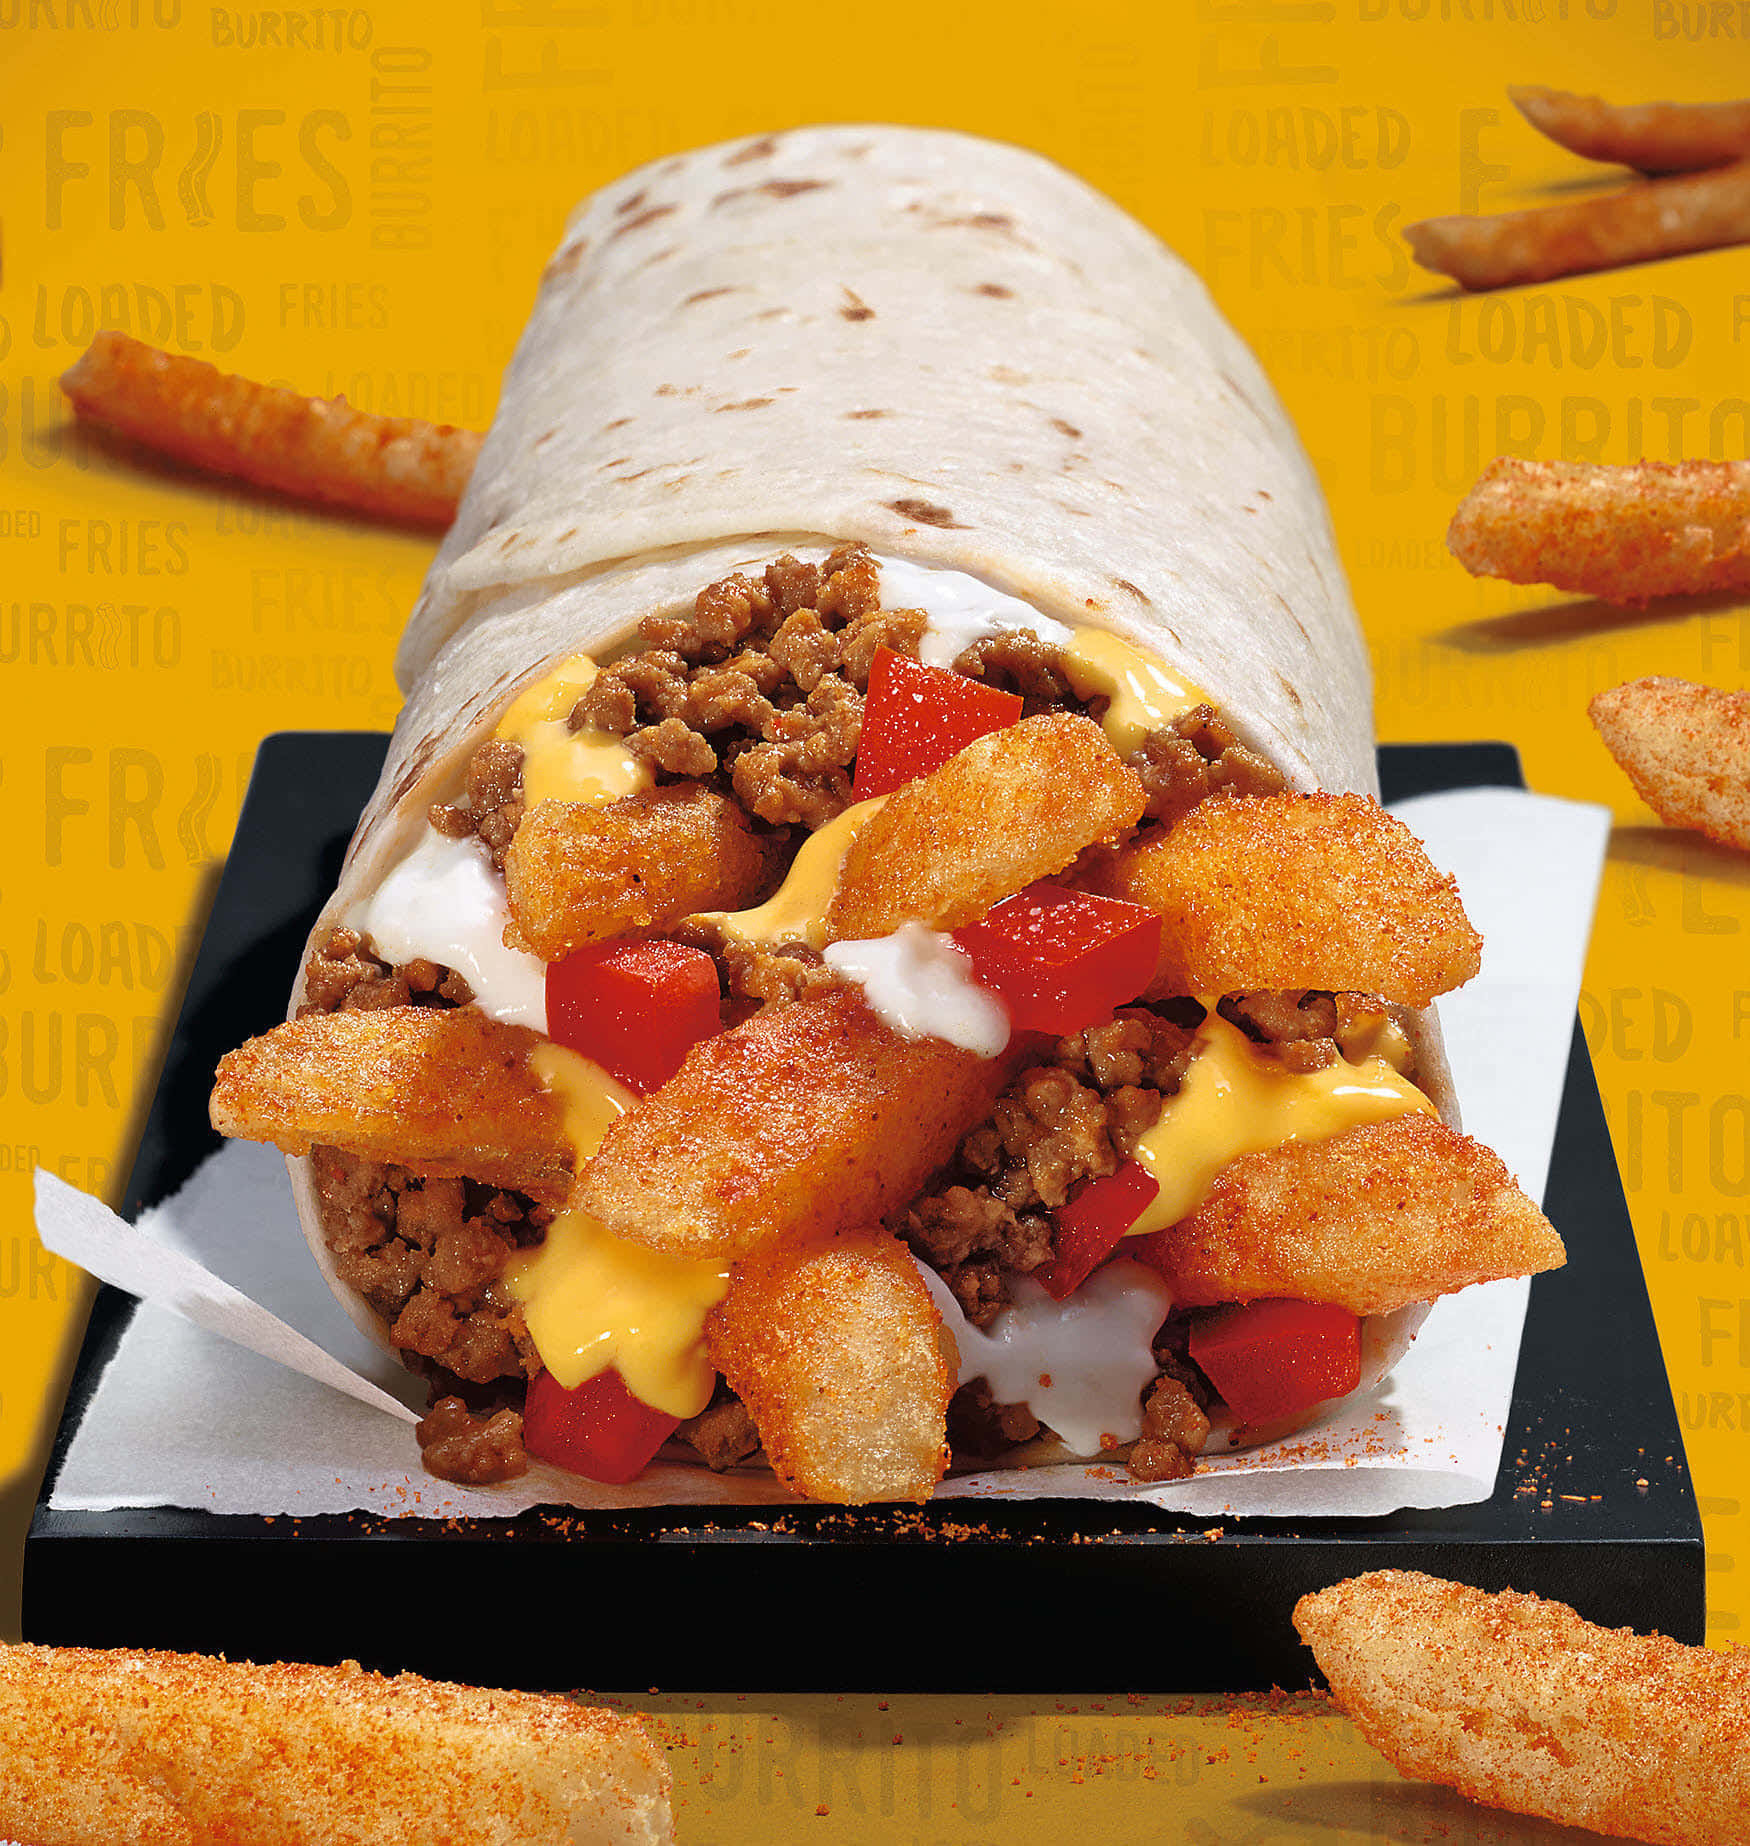 Get your fill with delicious and flavorful options from Taco Bell